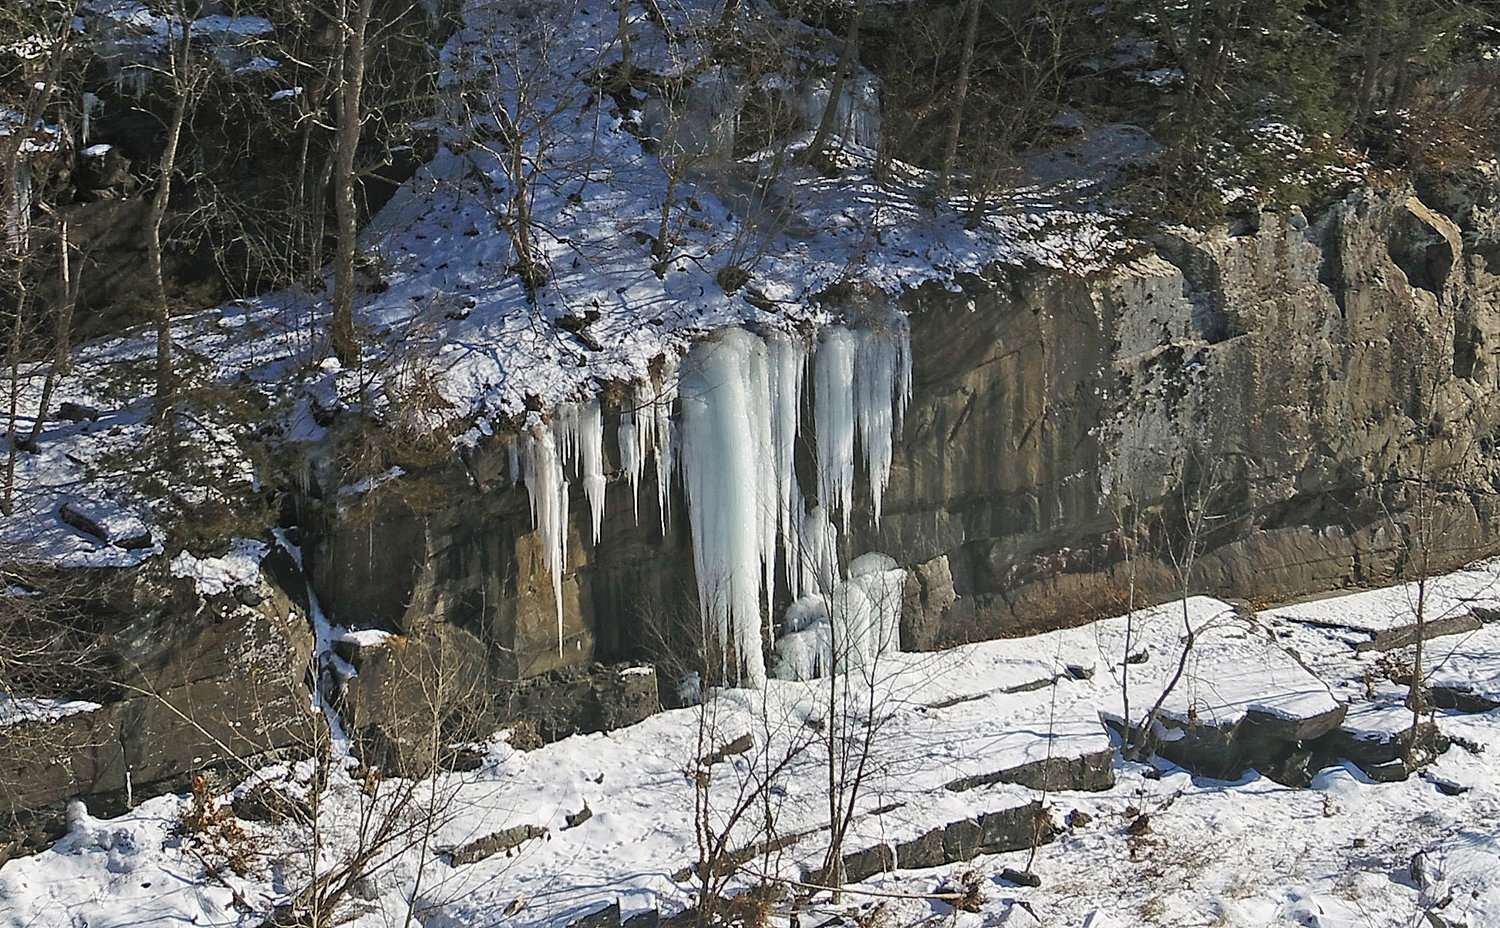 This seep along the river is probably just a trickle of water flowing out of the ledge during warmer weather. In cold weather, seeps form huge icicles that resemble stalactites in an underground cavern. They really start to form when the temperatures are in the teens or single digits. They can be found along many rock outcrops; also check streams that form waterfalls.